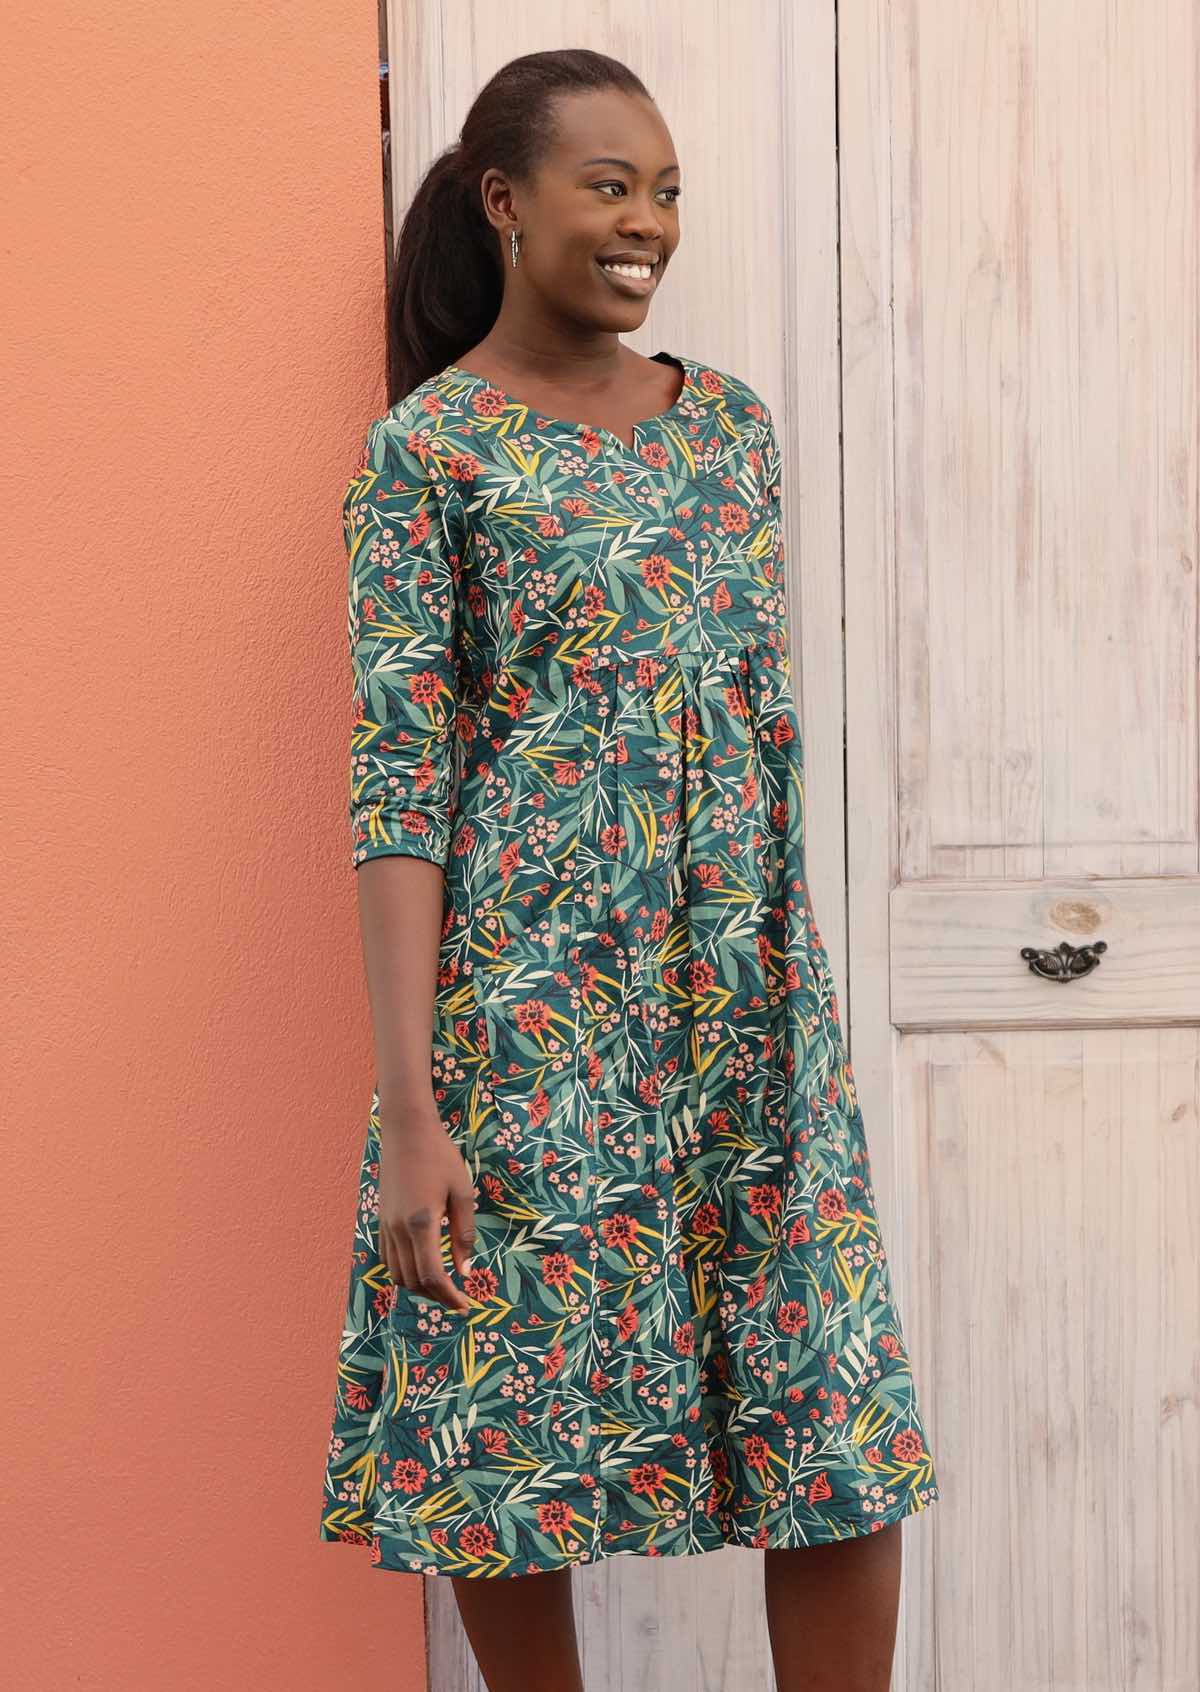 Model wears 100% cotton dress with a floral pattern and 3/4 length sleeves. 